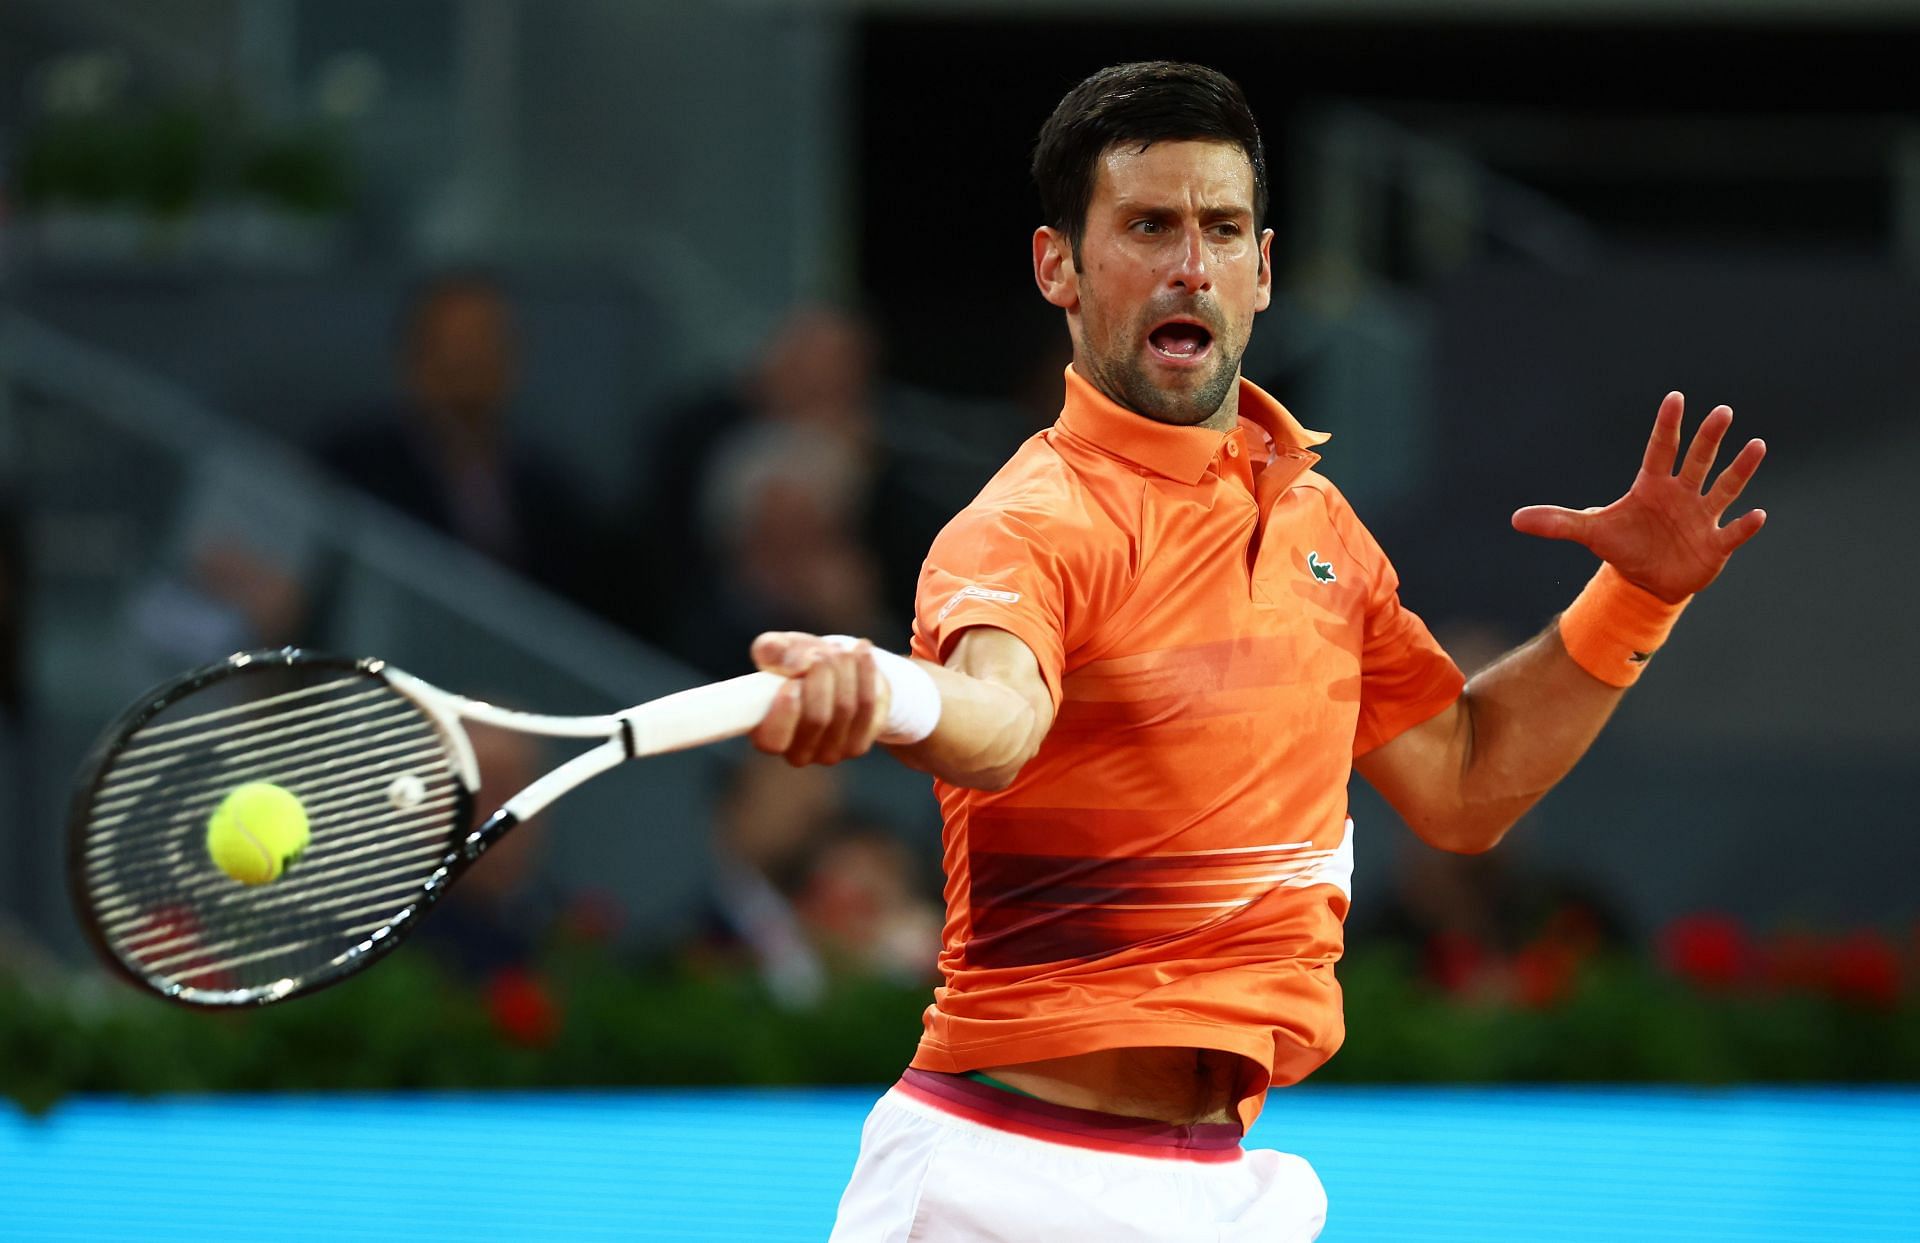 Novak Djokovic plays a forehand in his second round match against Gael Monfils